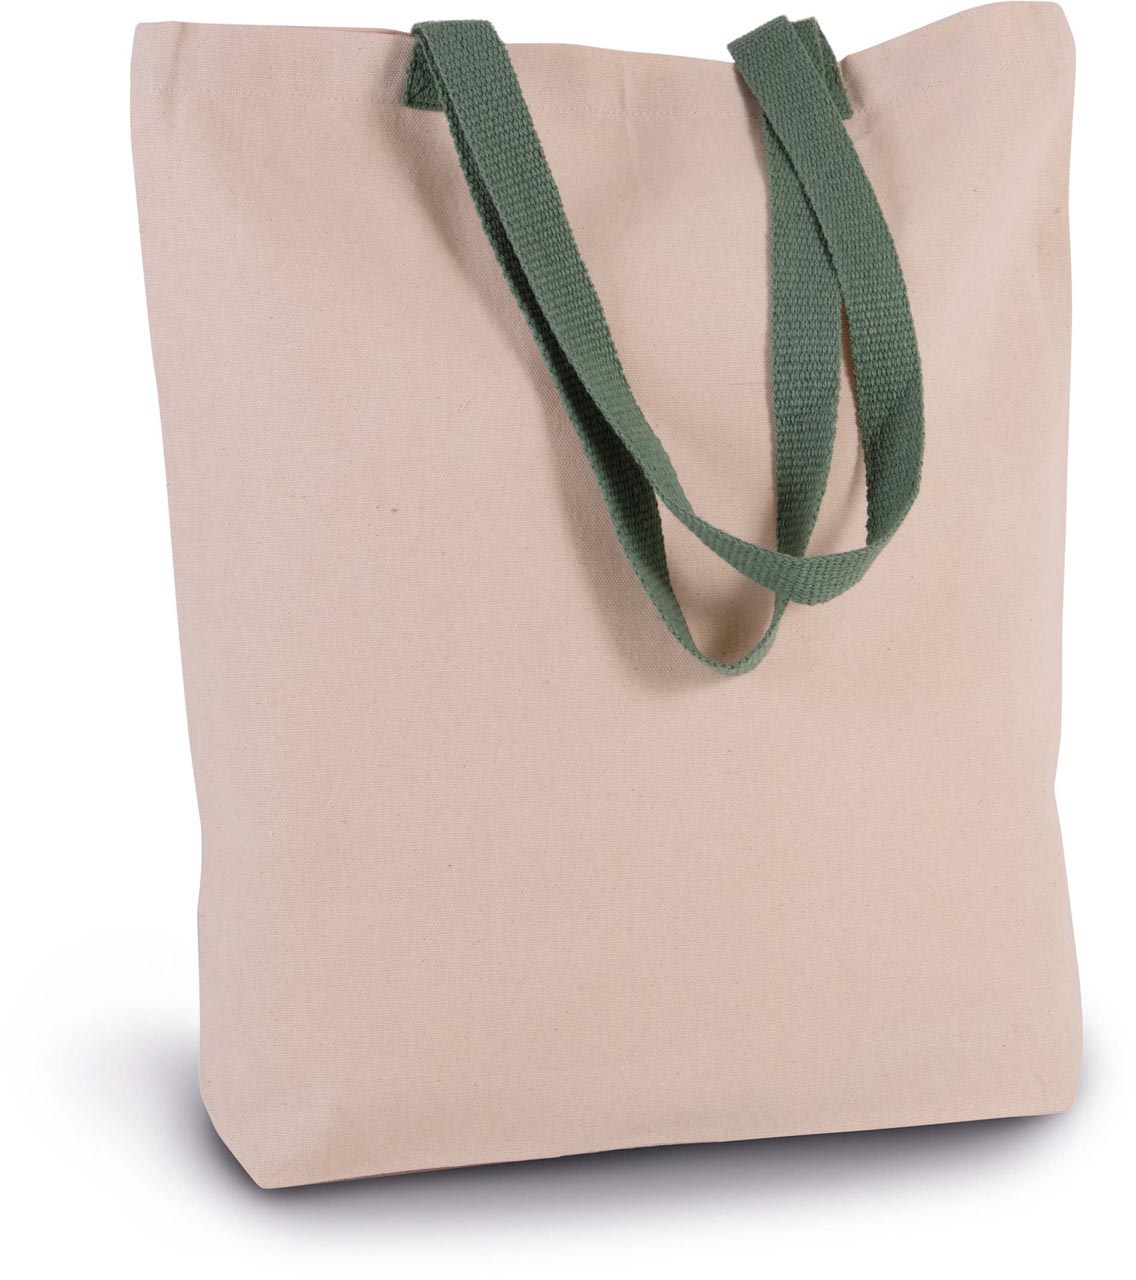 KI0278 SHOPPER BAG WITH GUSSET AND CONTRAST COLOUR HANDLE